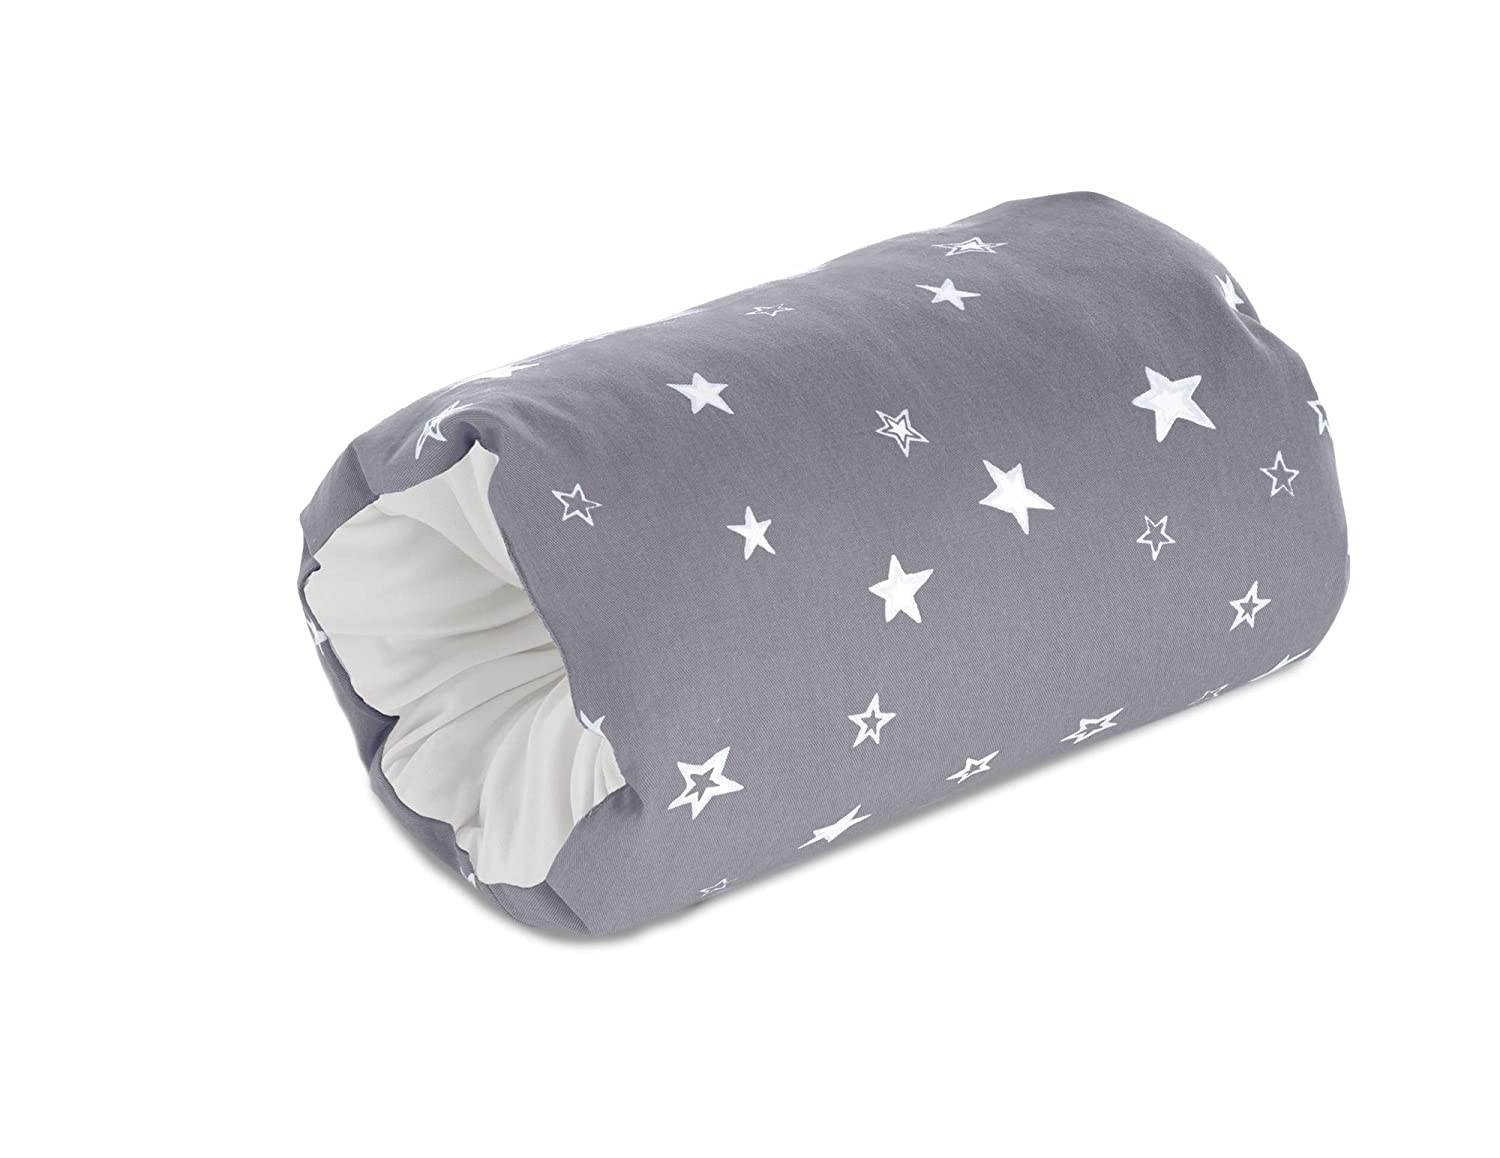 The Theraline nursing roll, nursing pillow, carrying and cuddly cushion.